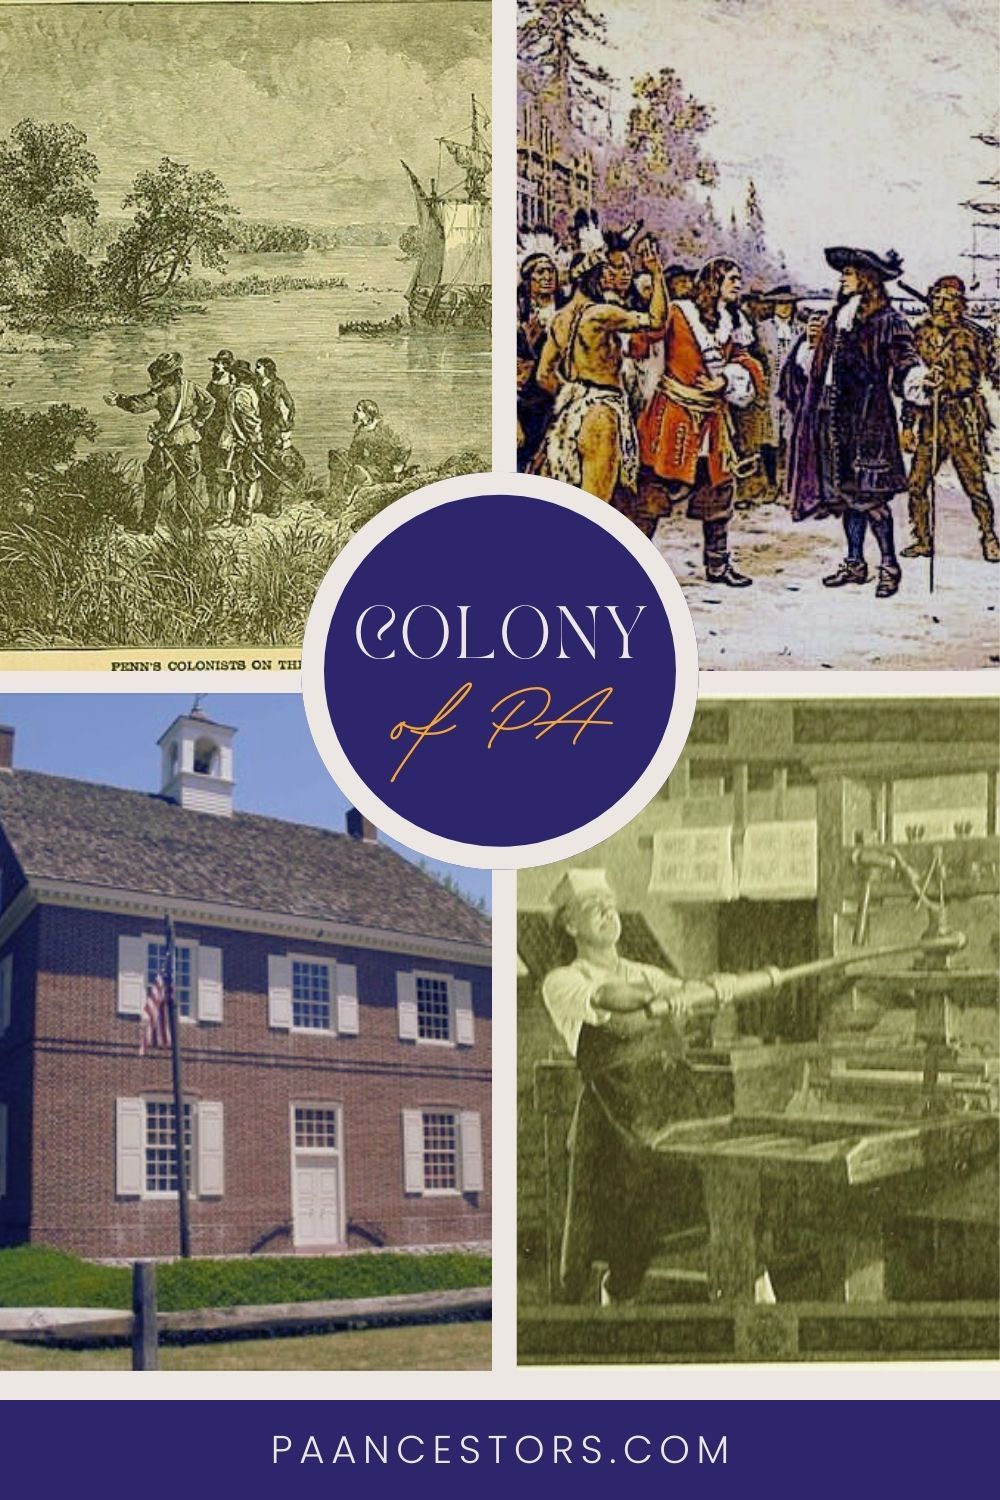 Pennsylvania's Colonial Government: A Tale of Religion, Democracy, and Progress